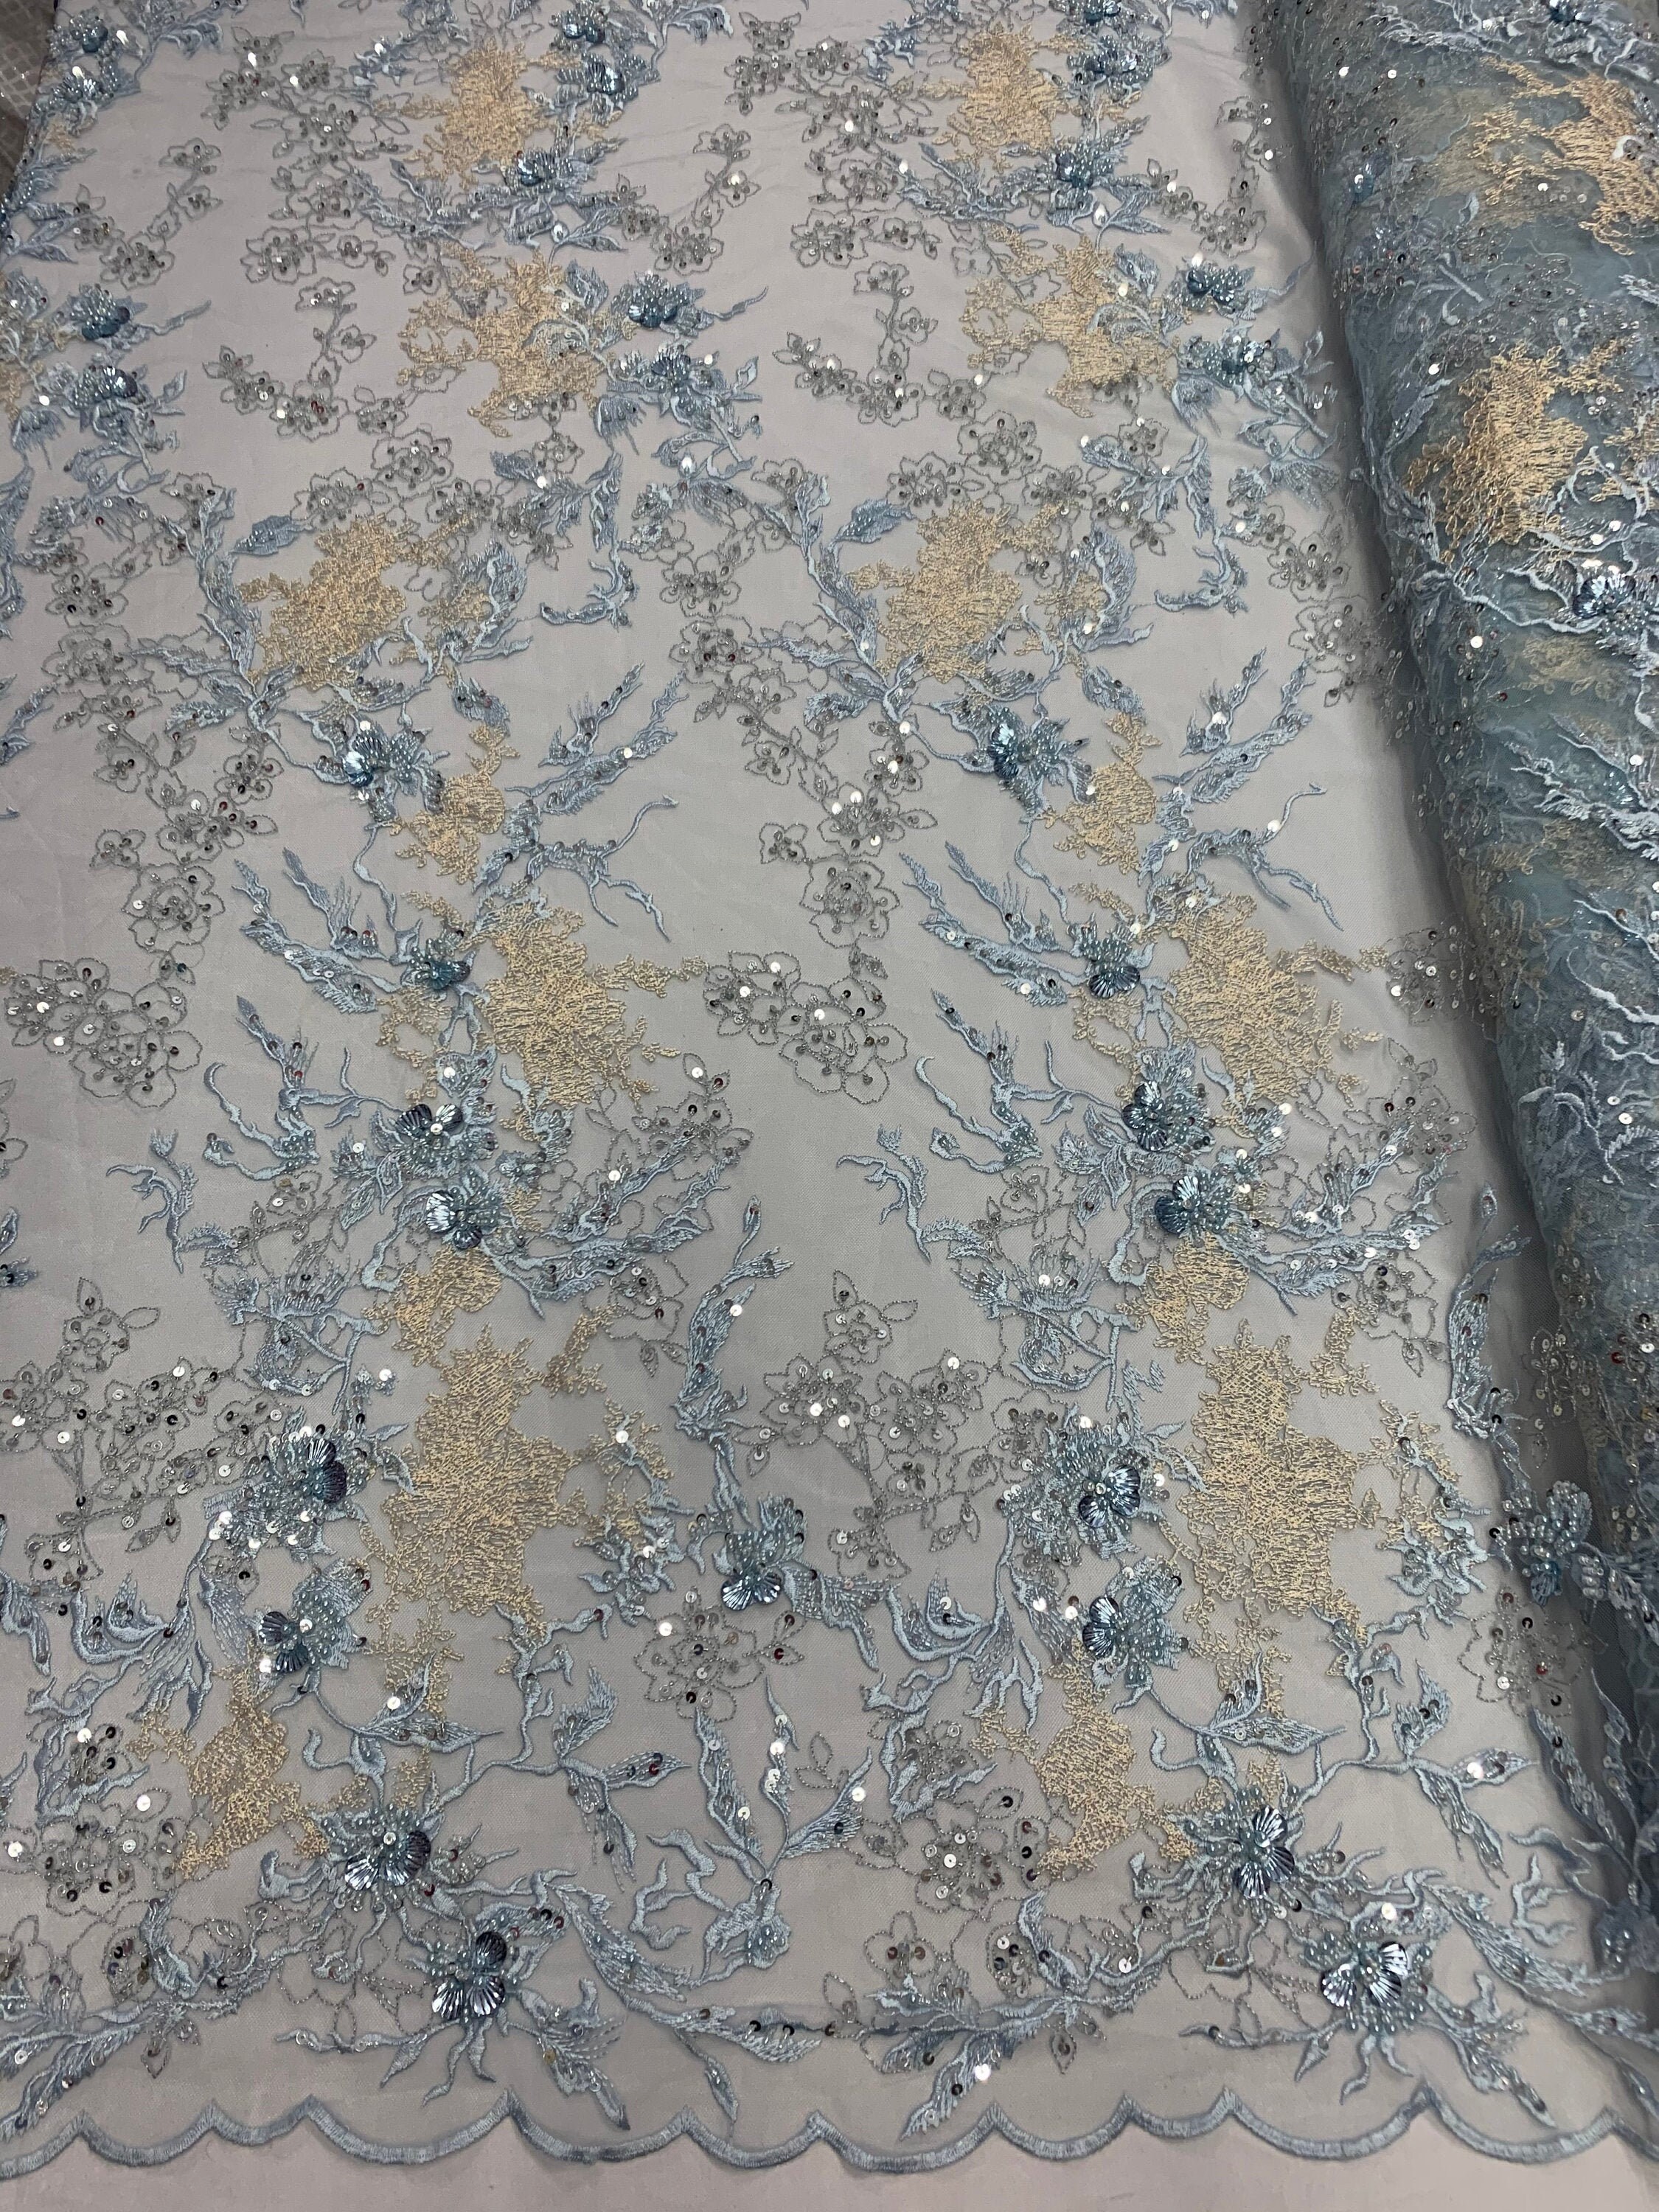 Rhinestone Embroidered Tulle Fabric: Exclusive Fabrics from India, SKU  00071633 at $1414 — Buy Luxury Fabrics Online